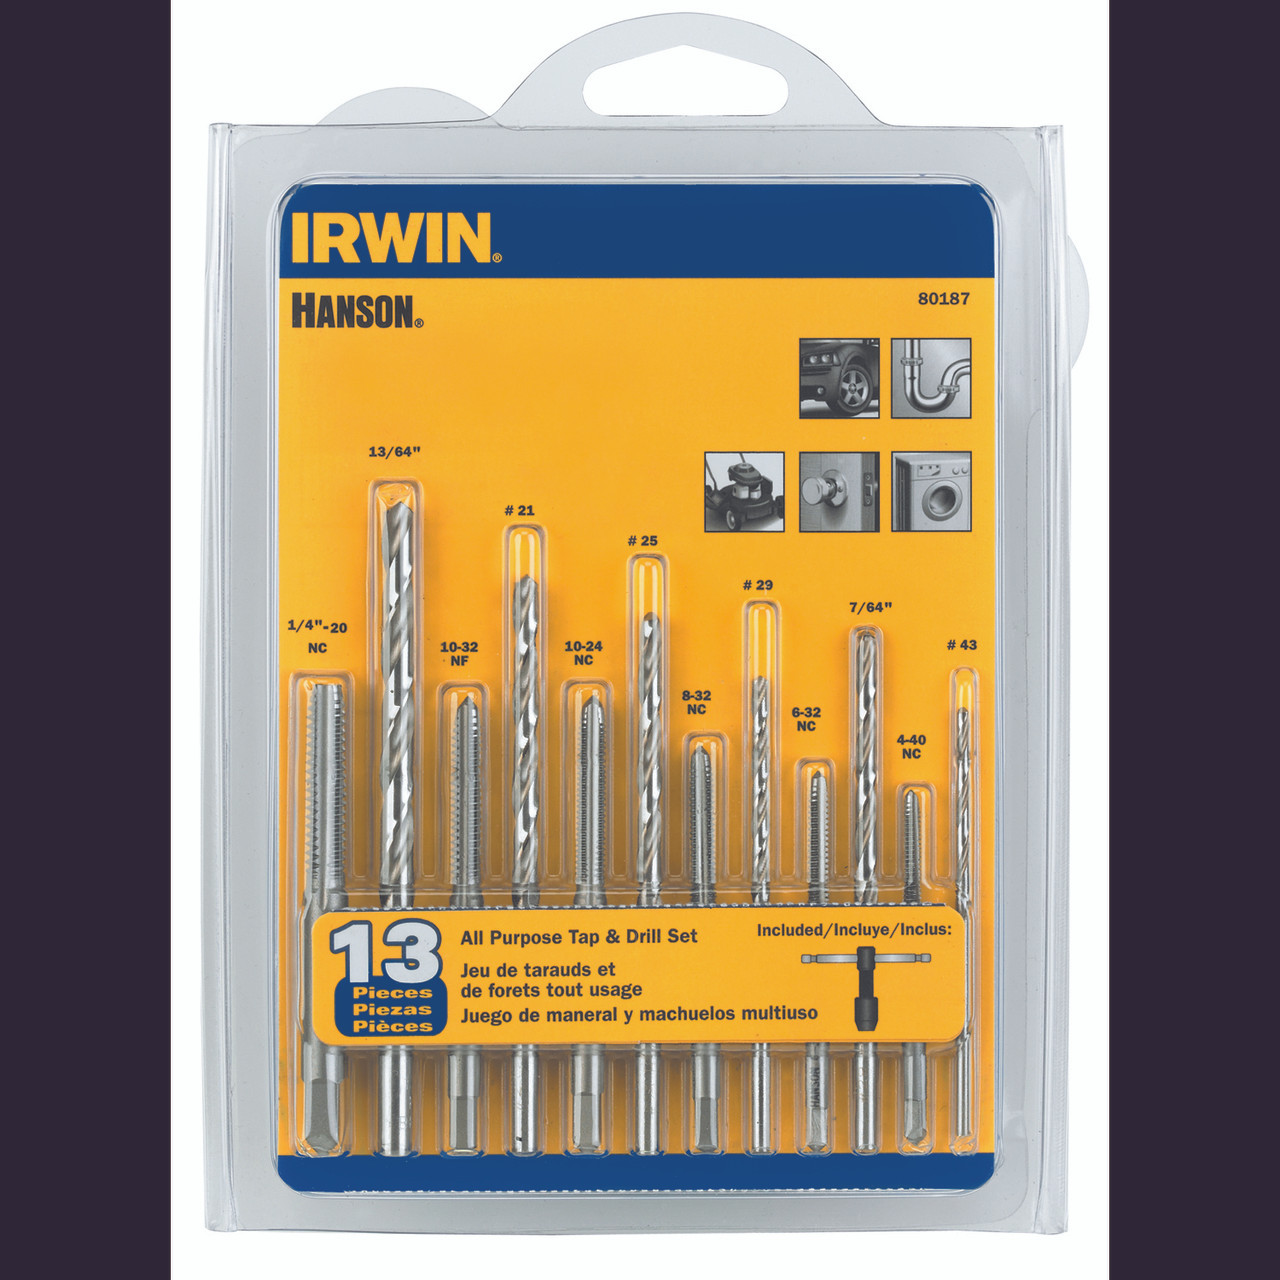 4-40 NC Tap and No 80209 IRWIN Drill And Tap Set 43 Drill Bit 